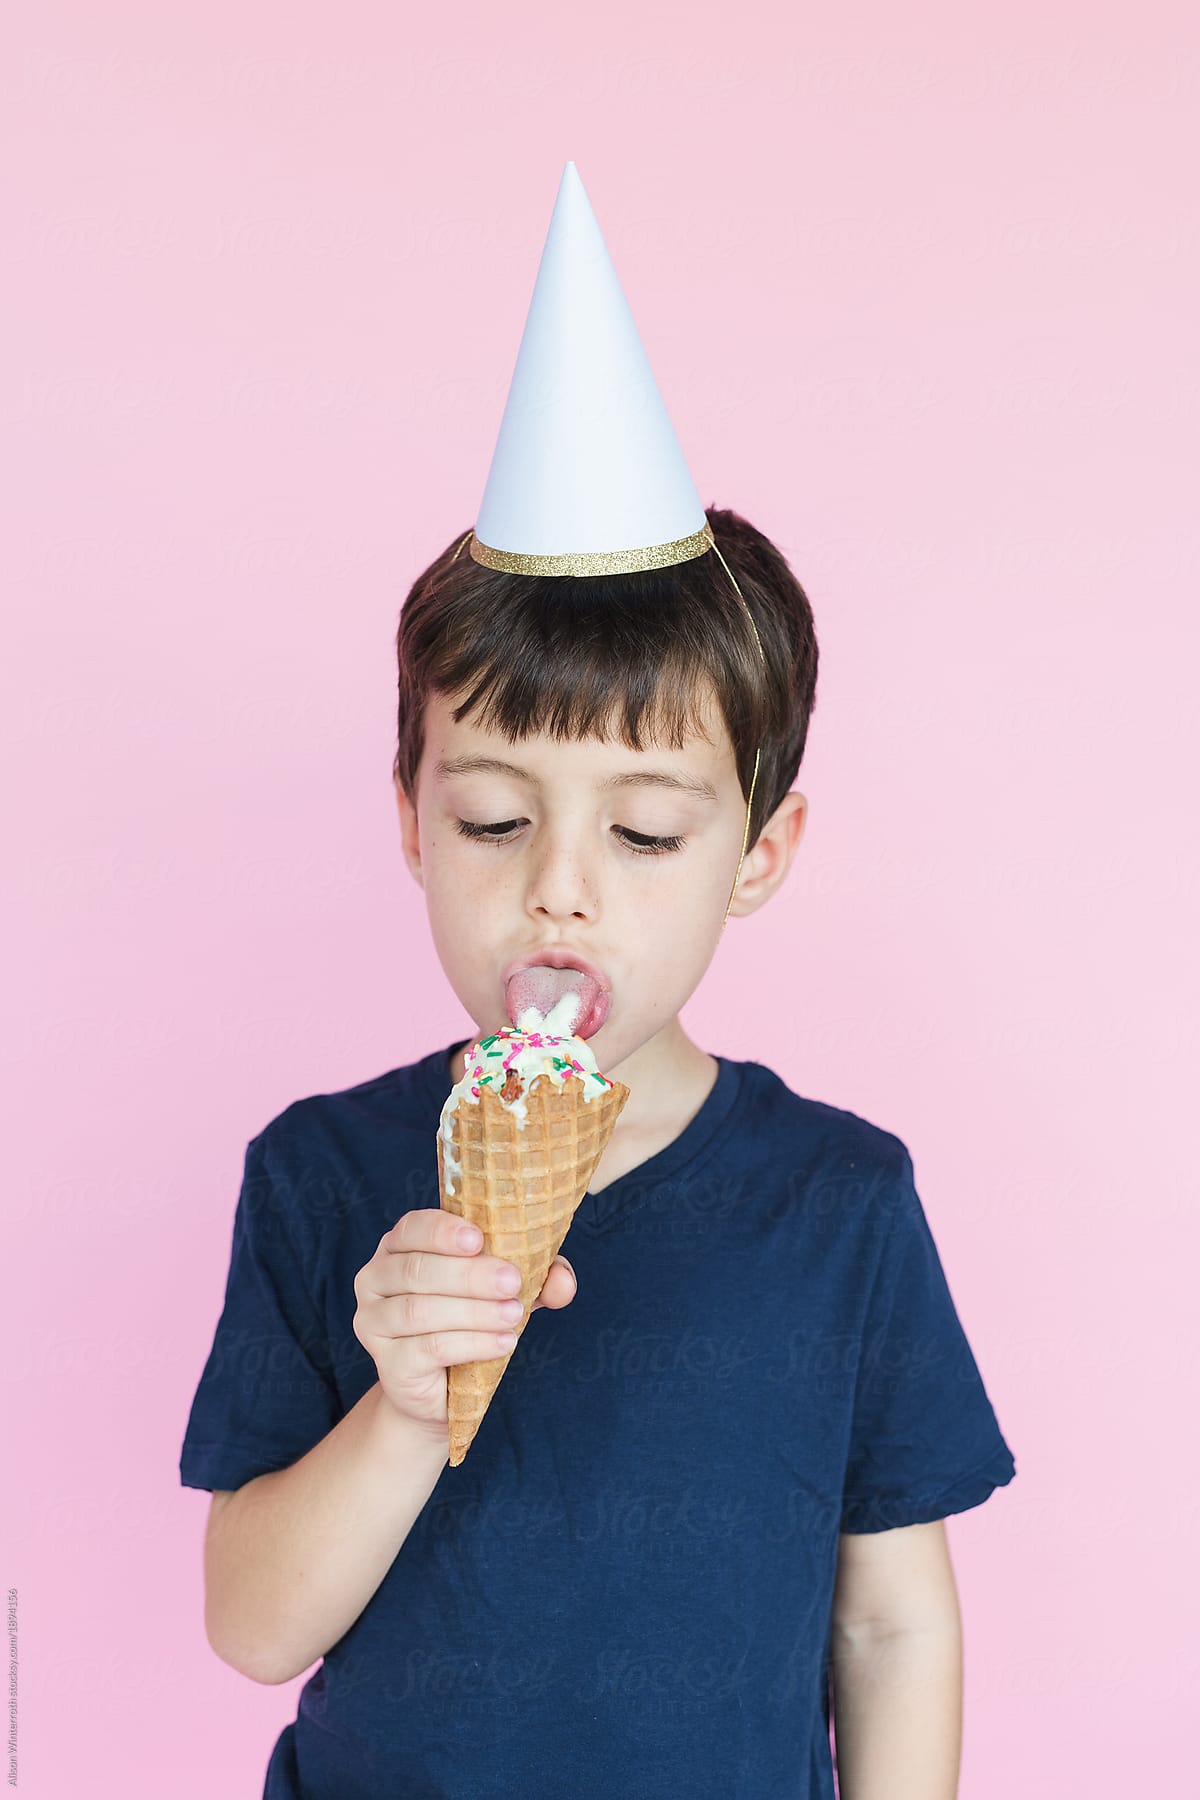 A Boy Digs In To An Ice Cream Cone With A Birthday Hat On His Head